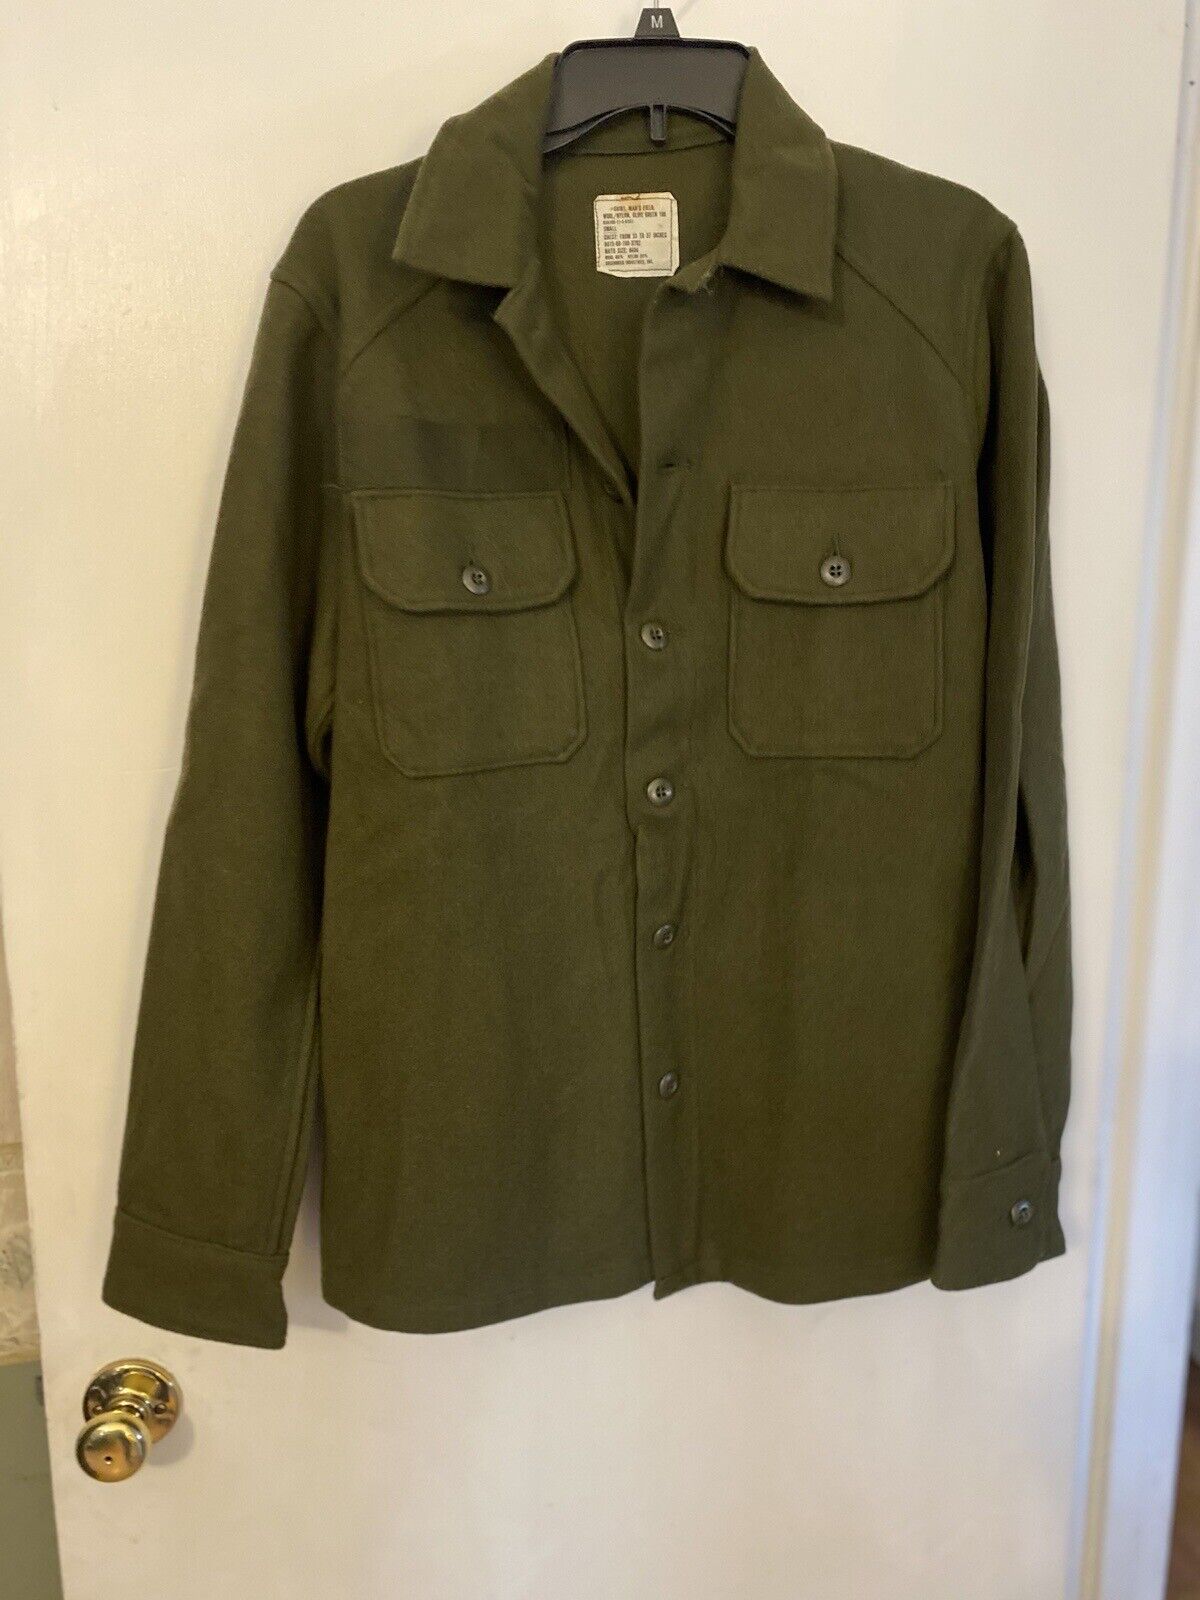 Vintage Military Jacket 1960s Army Coat Olive Green Wool M